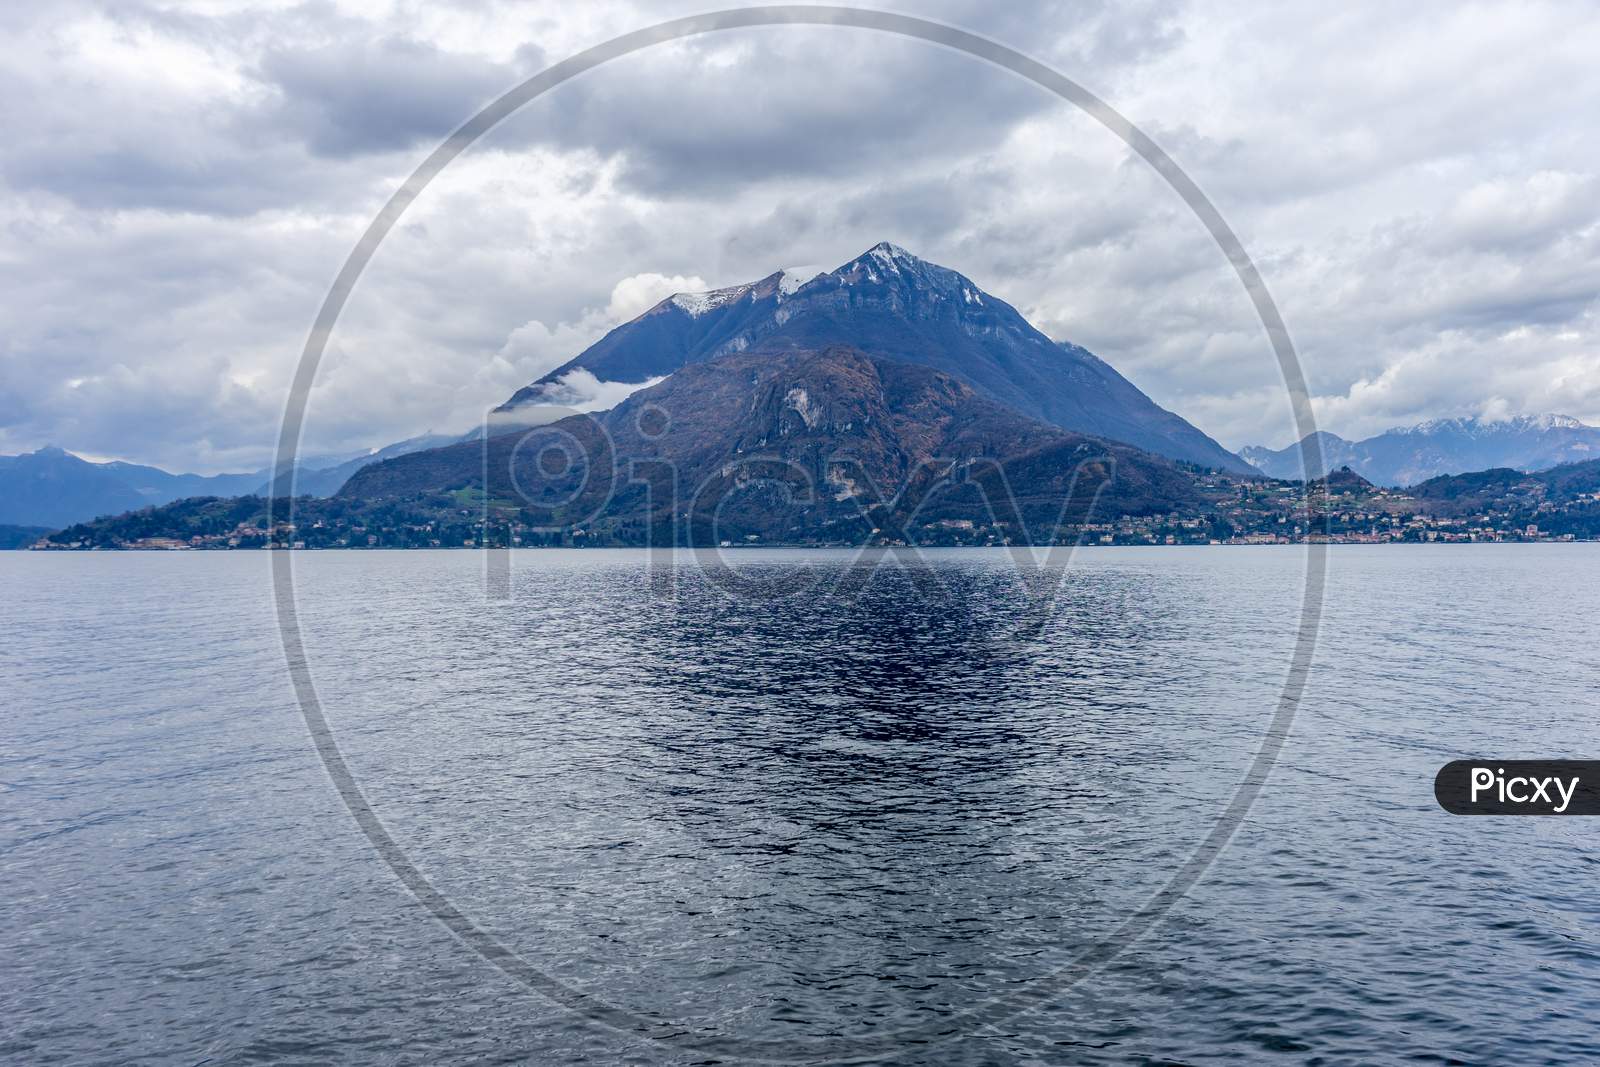 Italy, Varenna, Lake Como, A Large Body Of Water With A Mountain In The Background